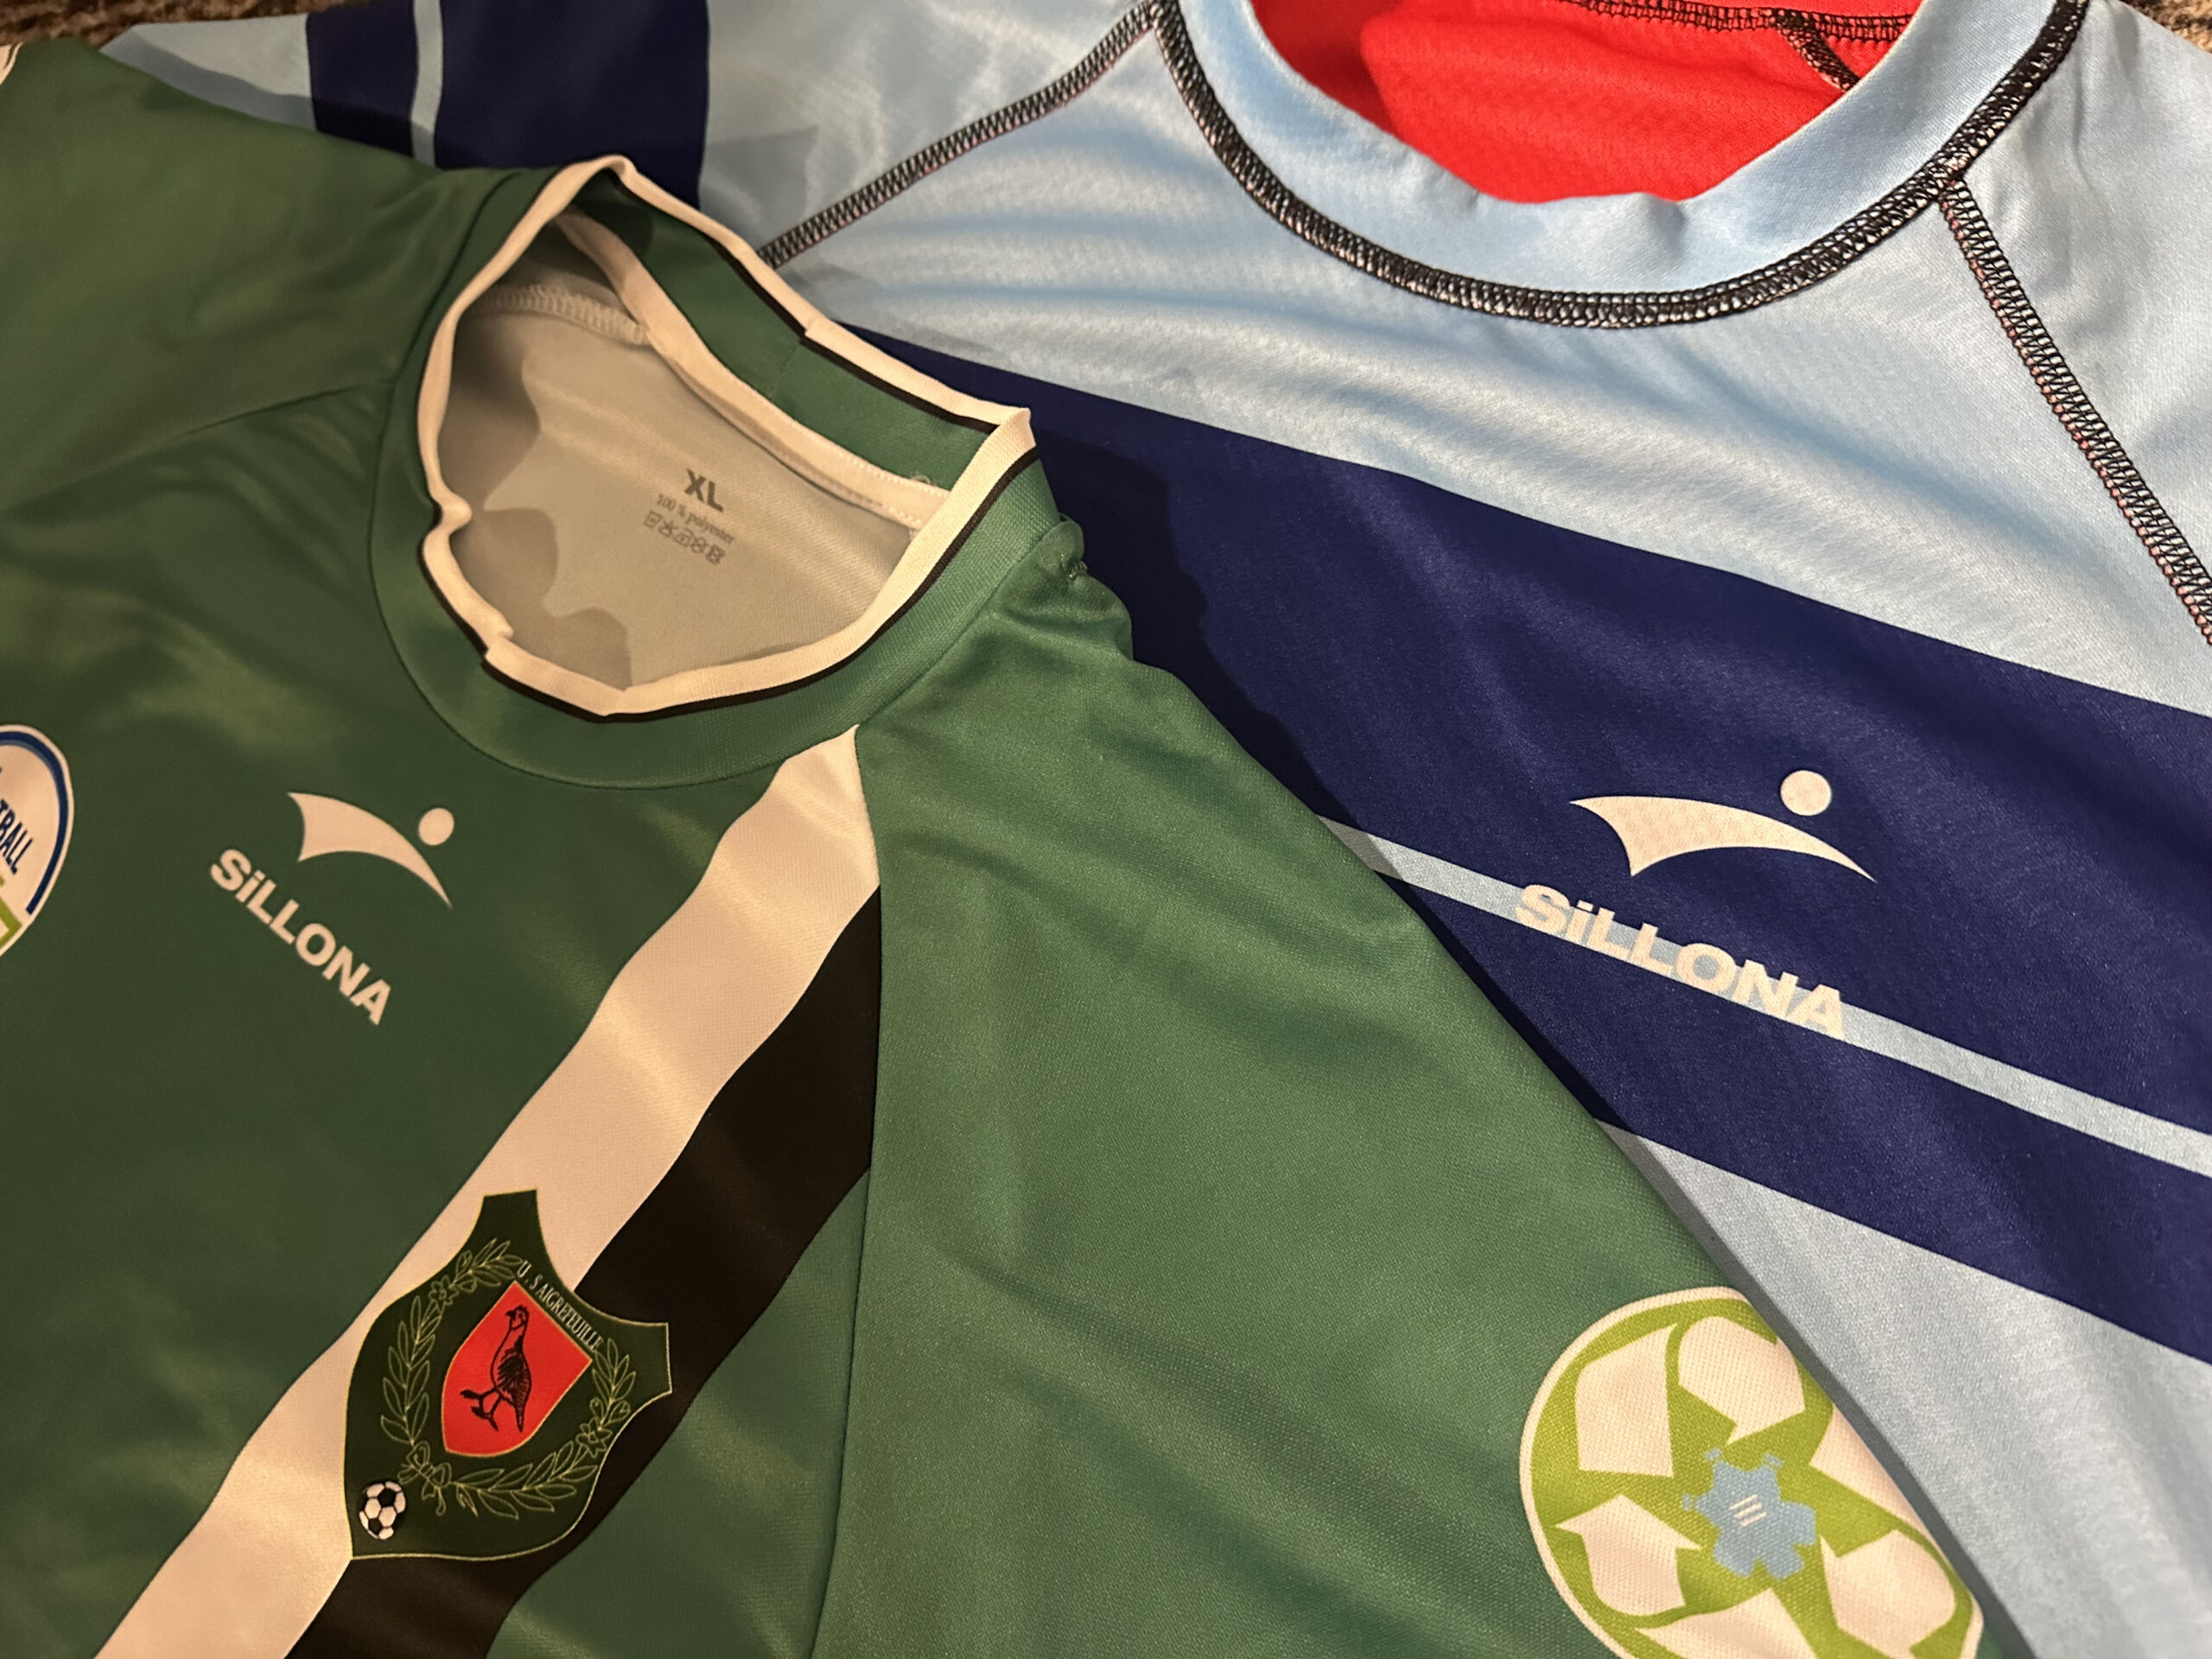 Des maillots de foot made in France 100% recyclés et recyclables